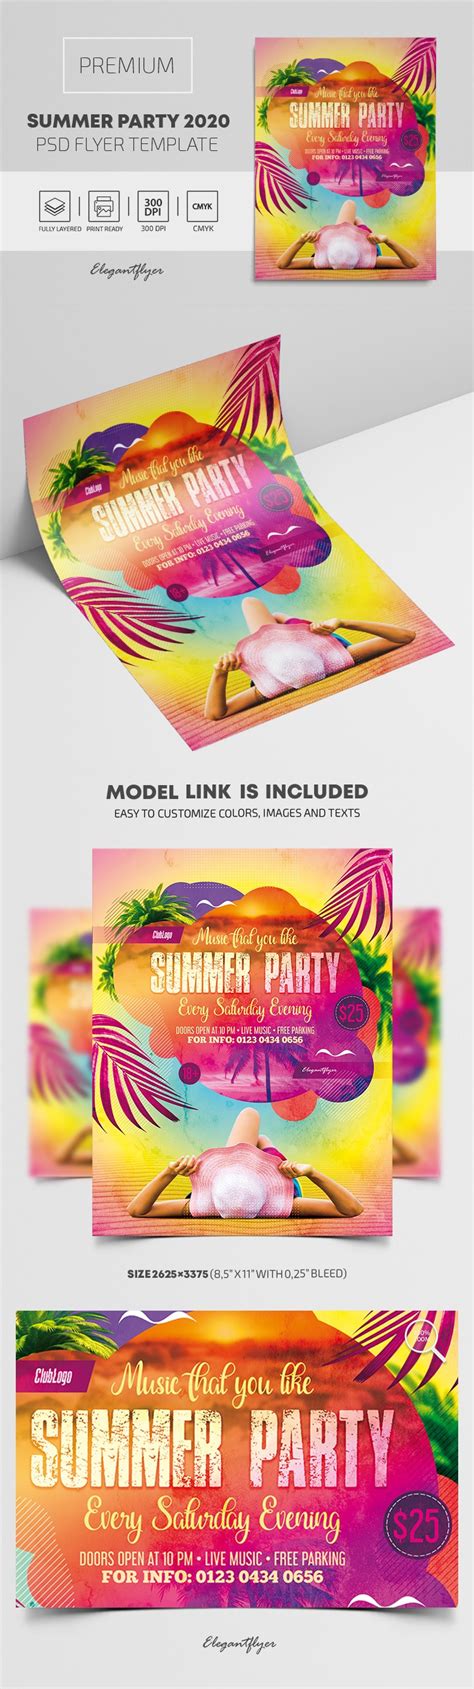 Multicolor Bright Summer Party 2020 Flyer Premium Flyer Template Psd